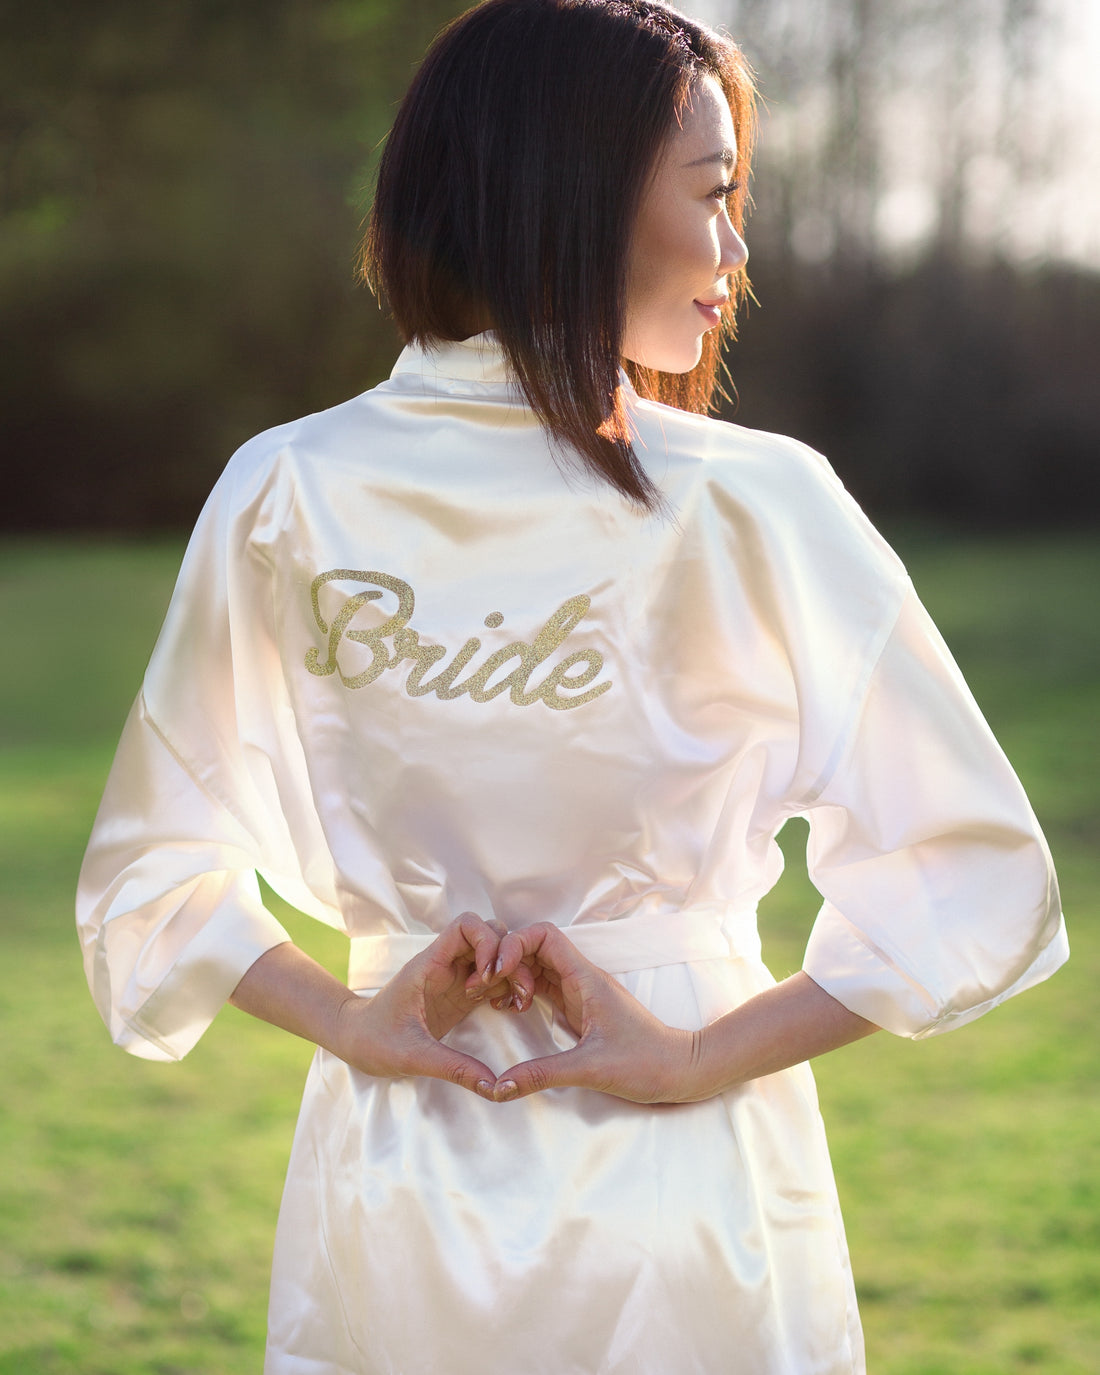 woman standing staring to the side wearing white robe that says bride in gold letters making a heart with her hands, Shop T.K.S